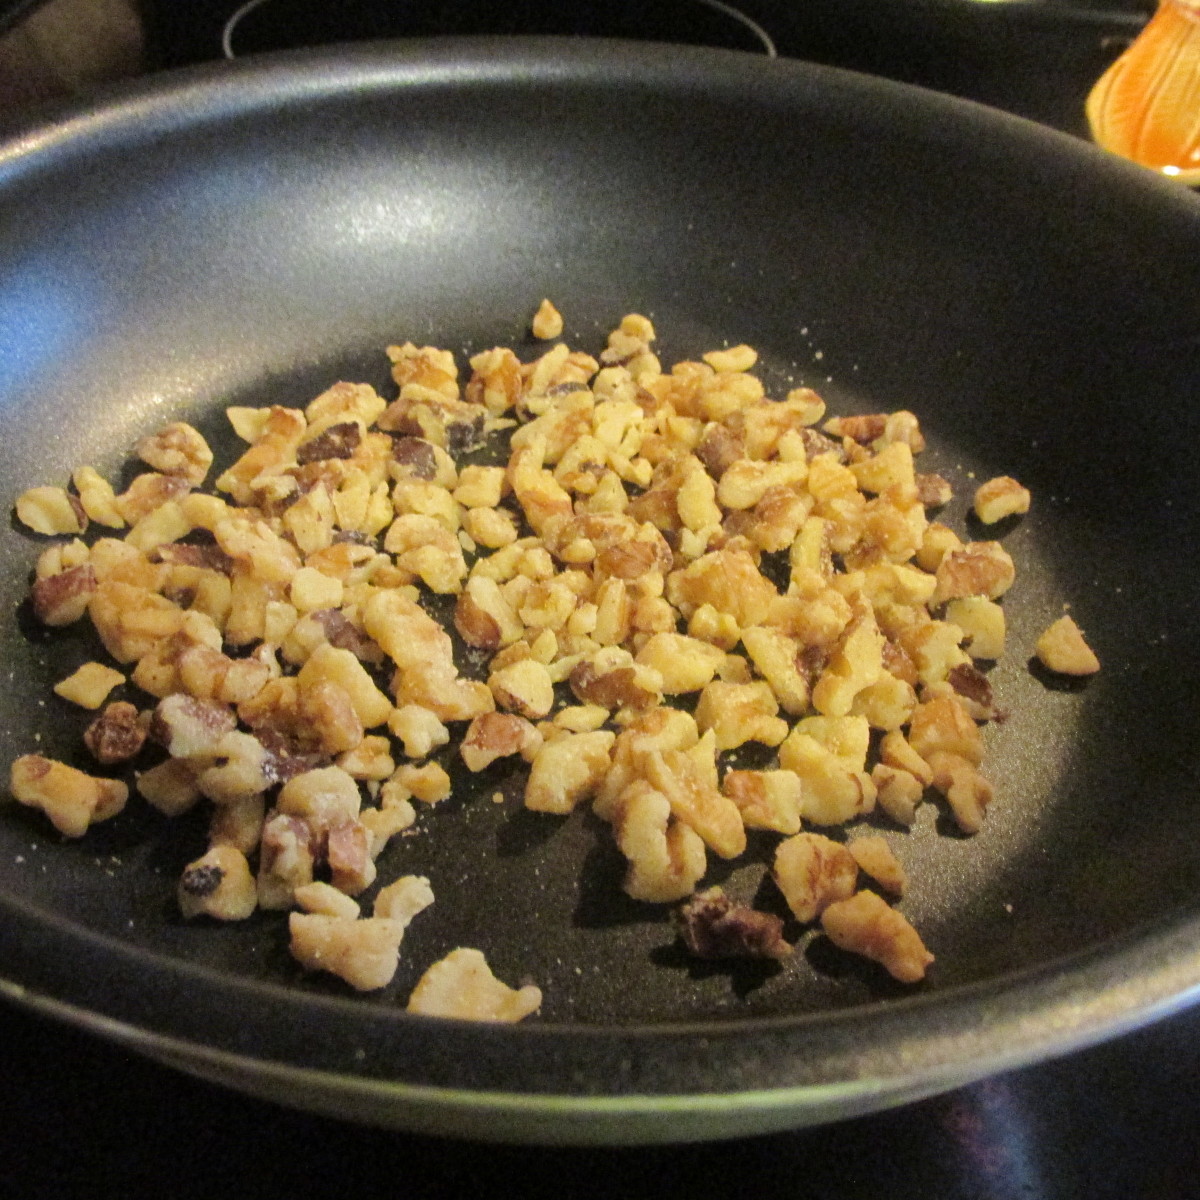 Walnuts toasting in a small pan.